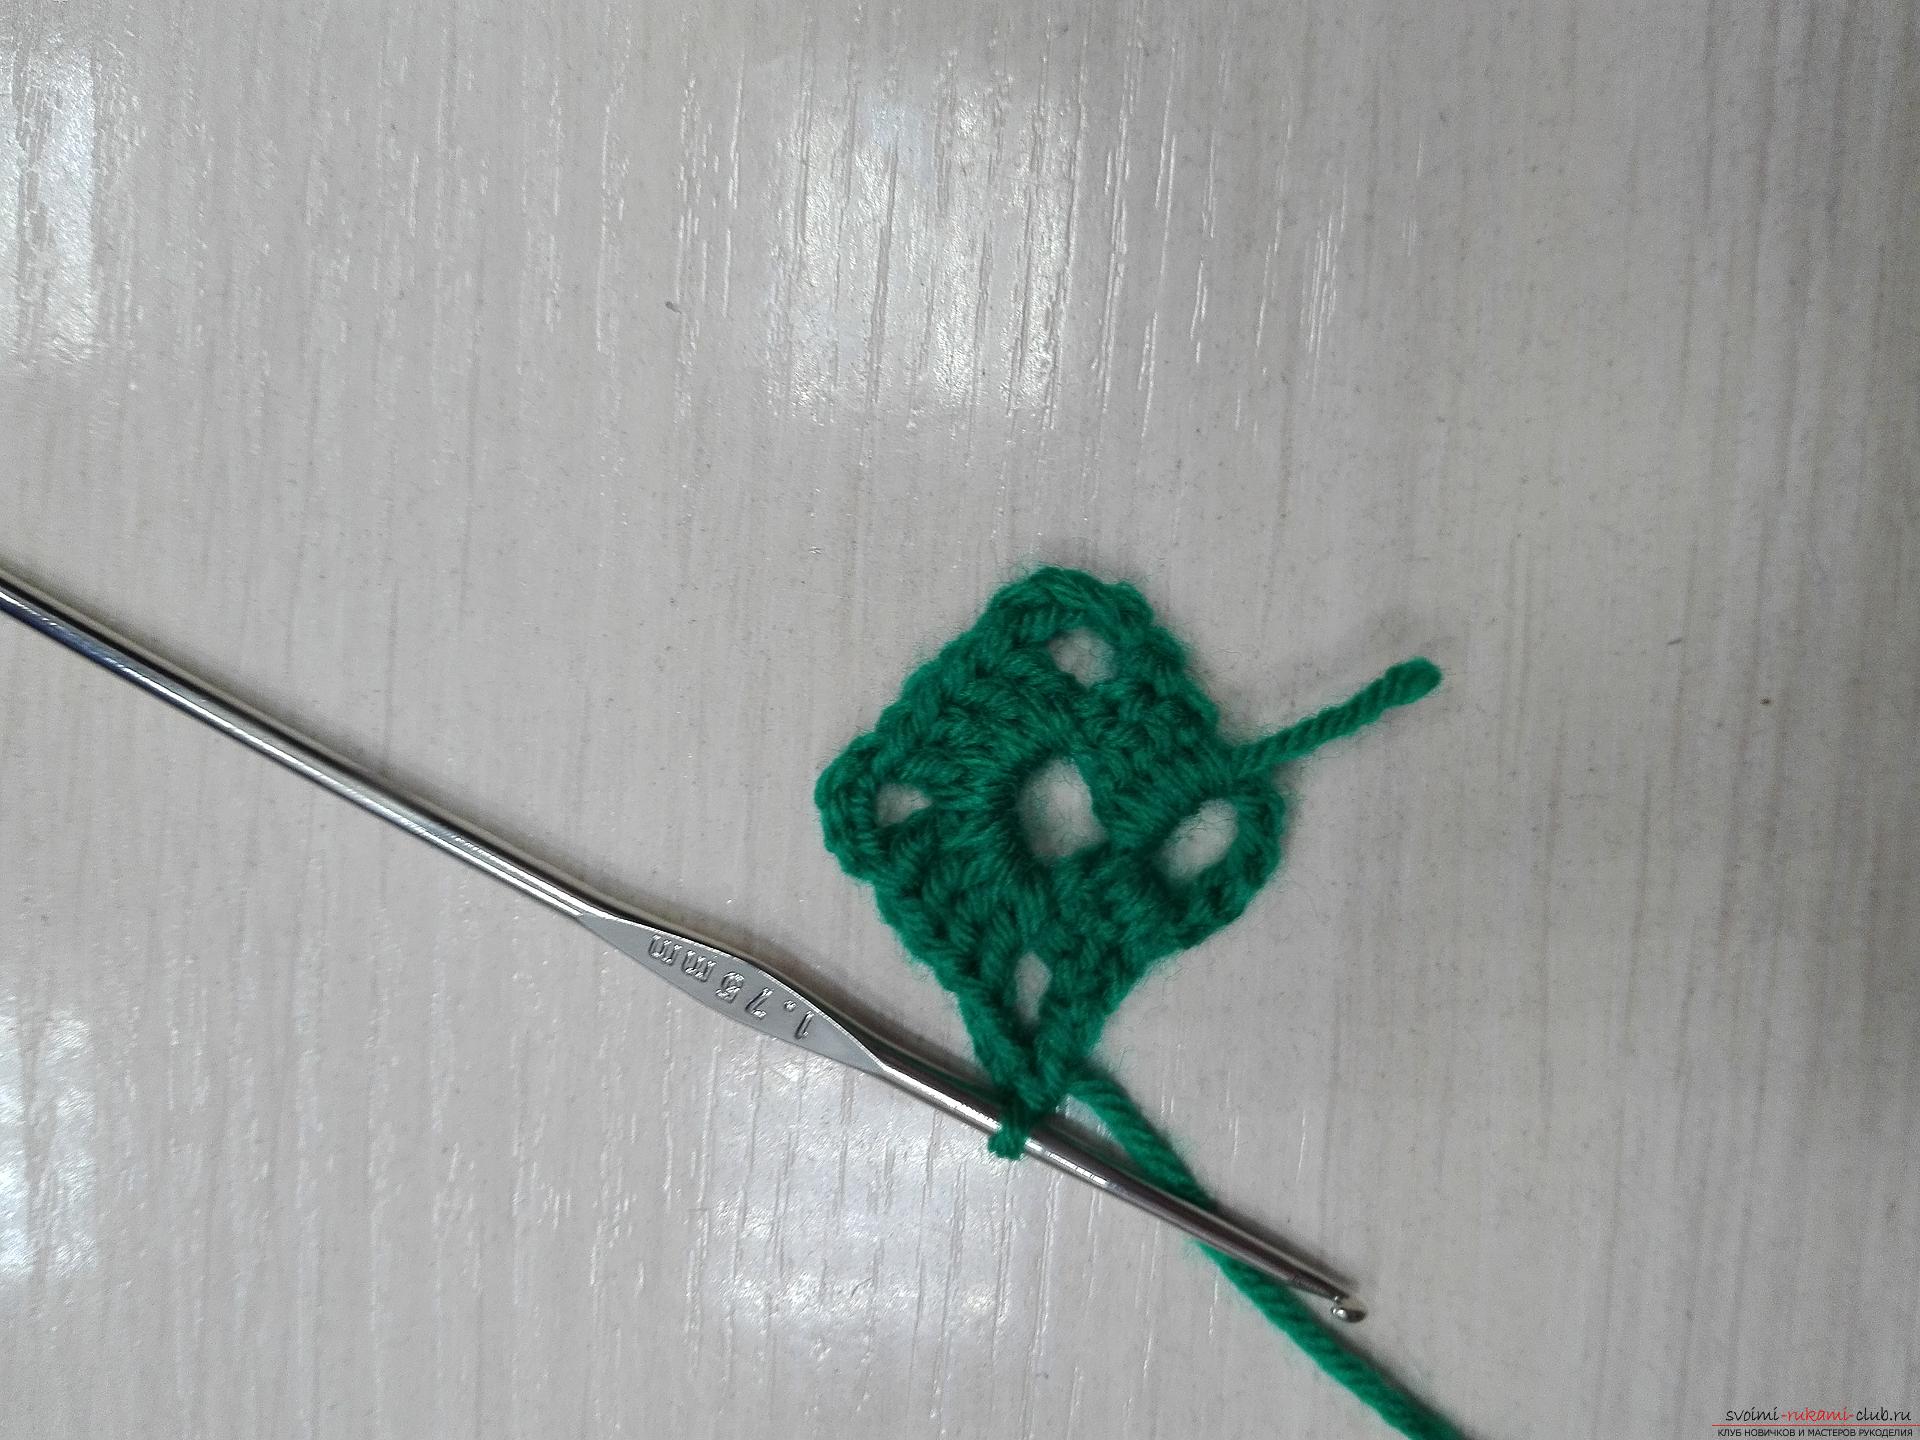 This master class on knitting is designed by the lover - he will teach how to tie the heart crochet. Photo №4